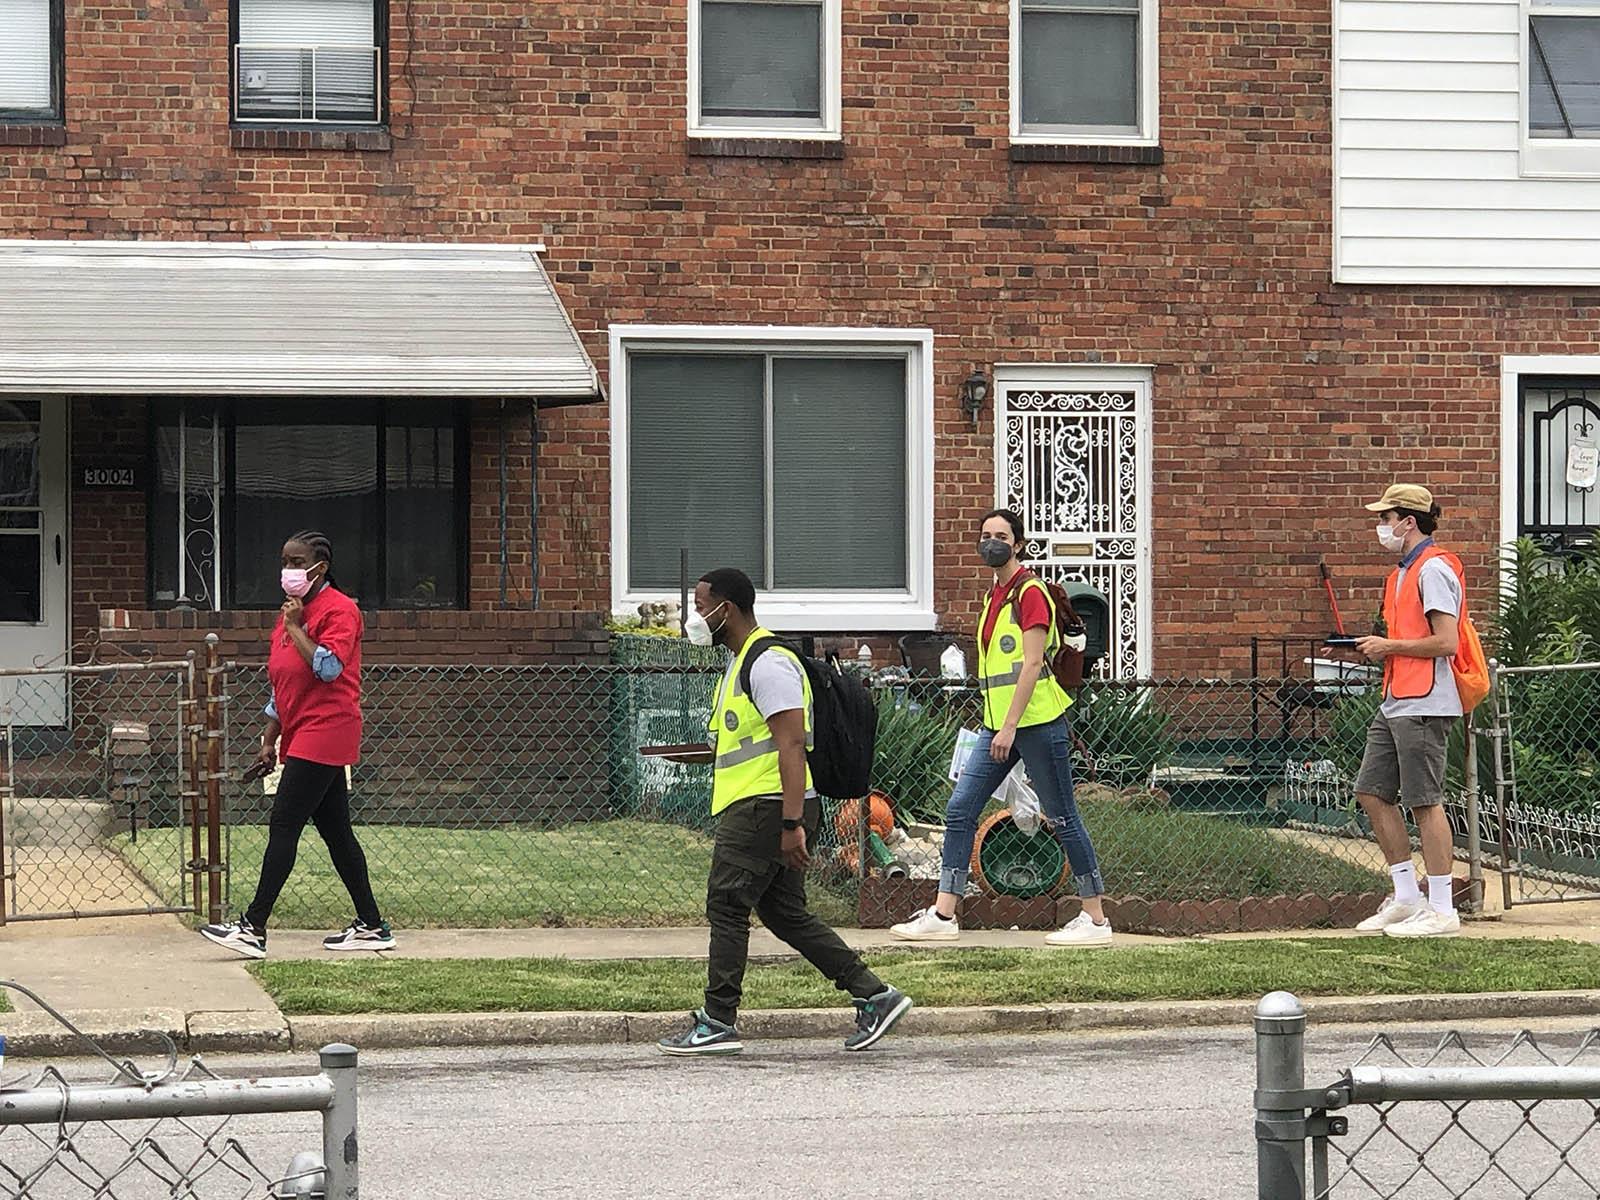 People walking in a neighborhood, wearing reflective vests and masks